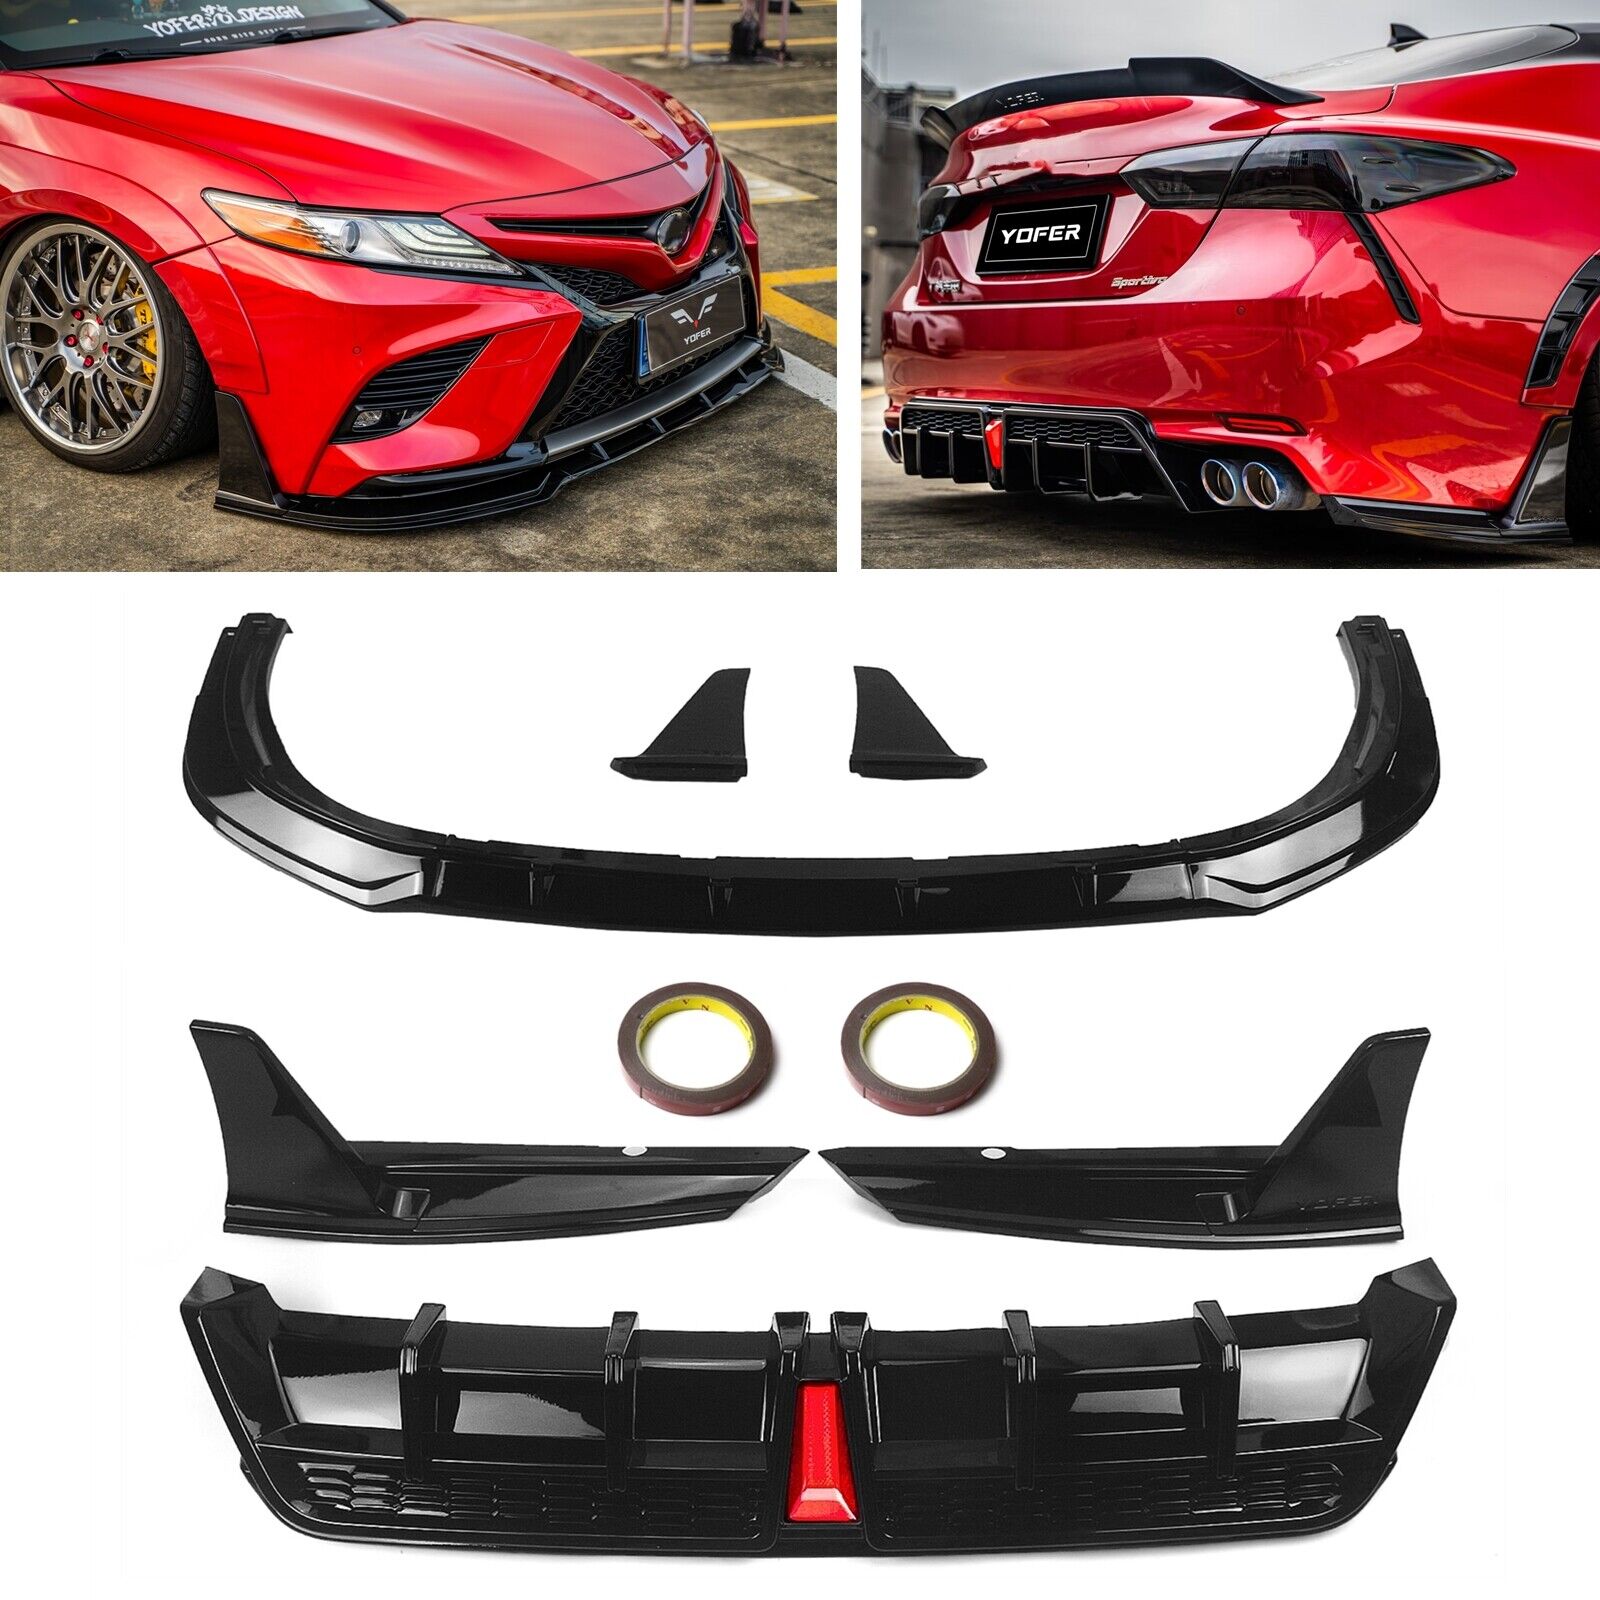 Car Rear Diffuser + Front Spoiler For Toyota Camry 2018-2023 SE XSE YOFER Style